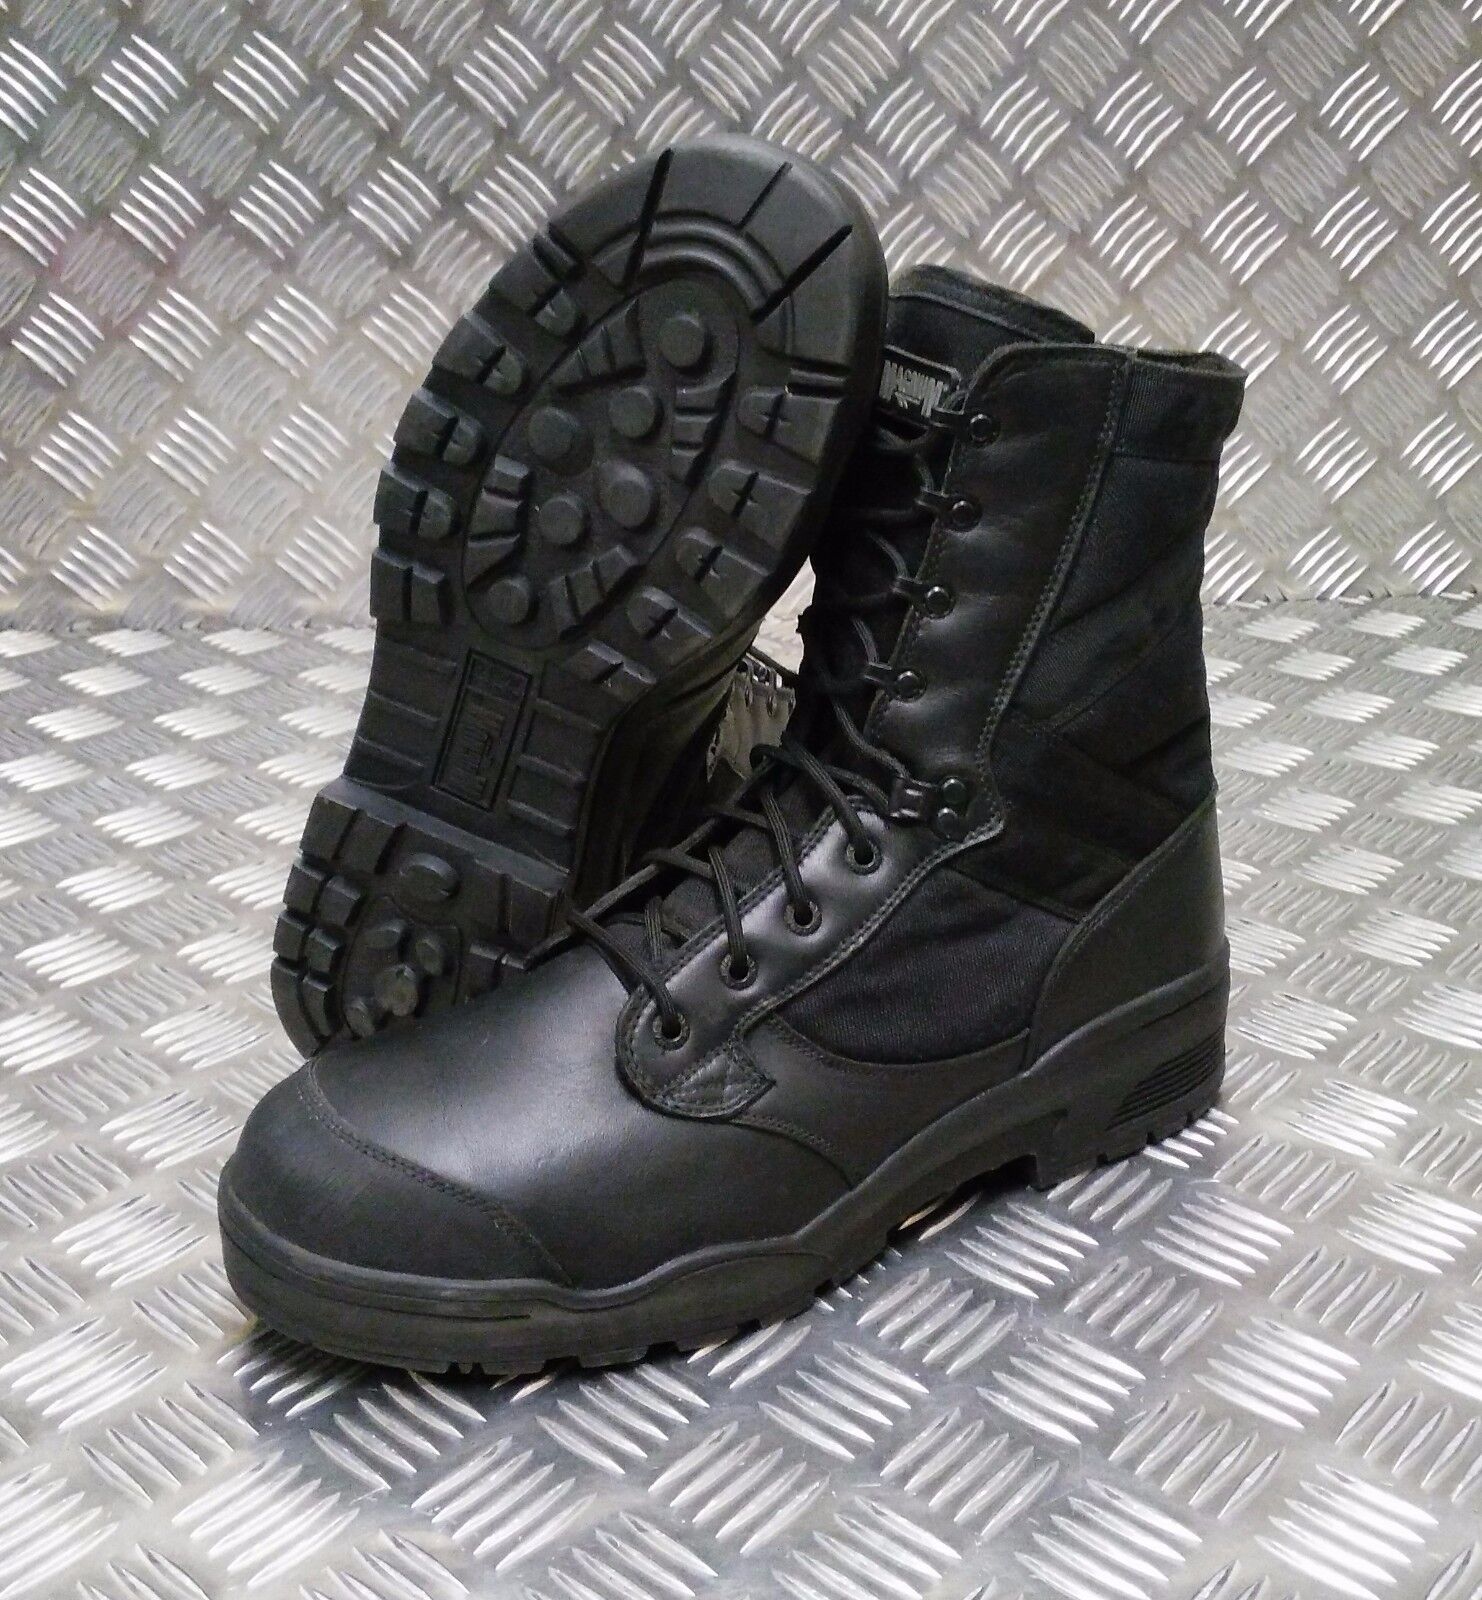 Magnum Black STEEL Toe Cap Boots Genuine British Army Issue Hot Weather - NEW